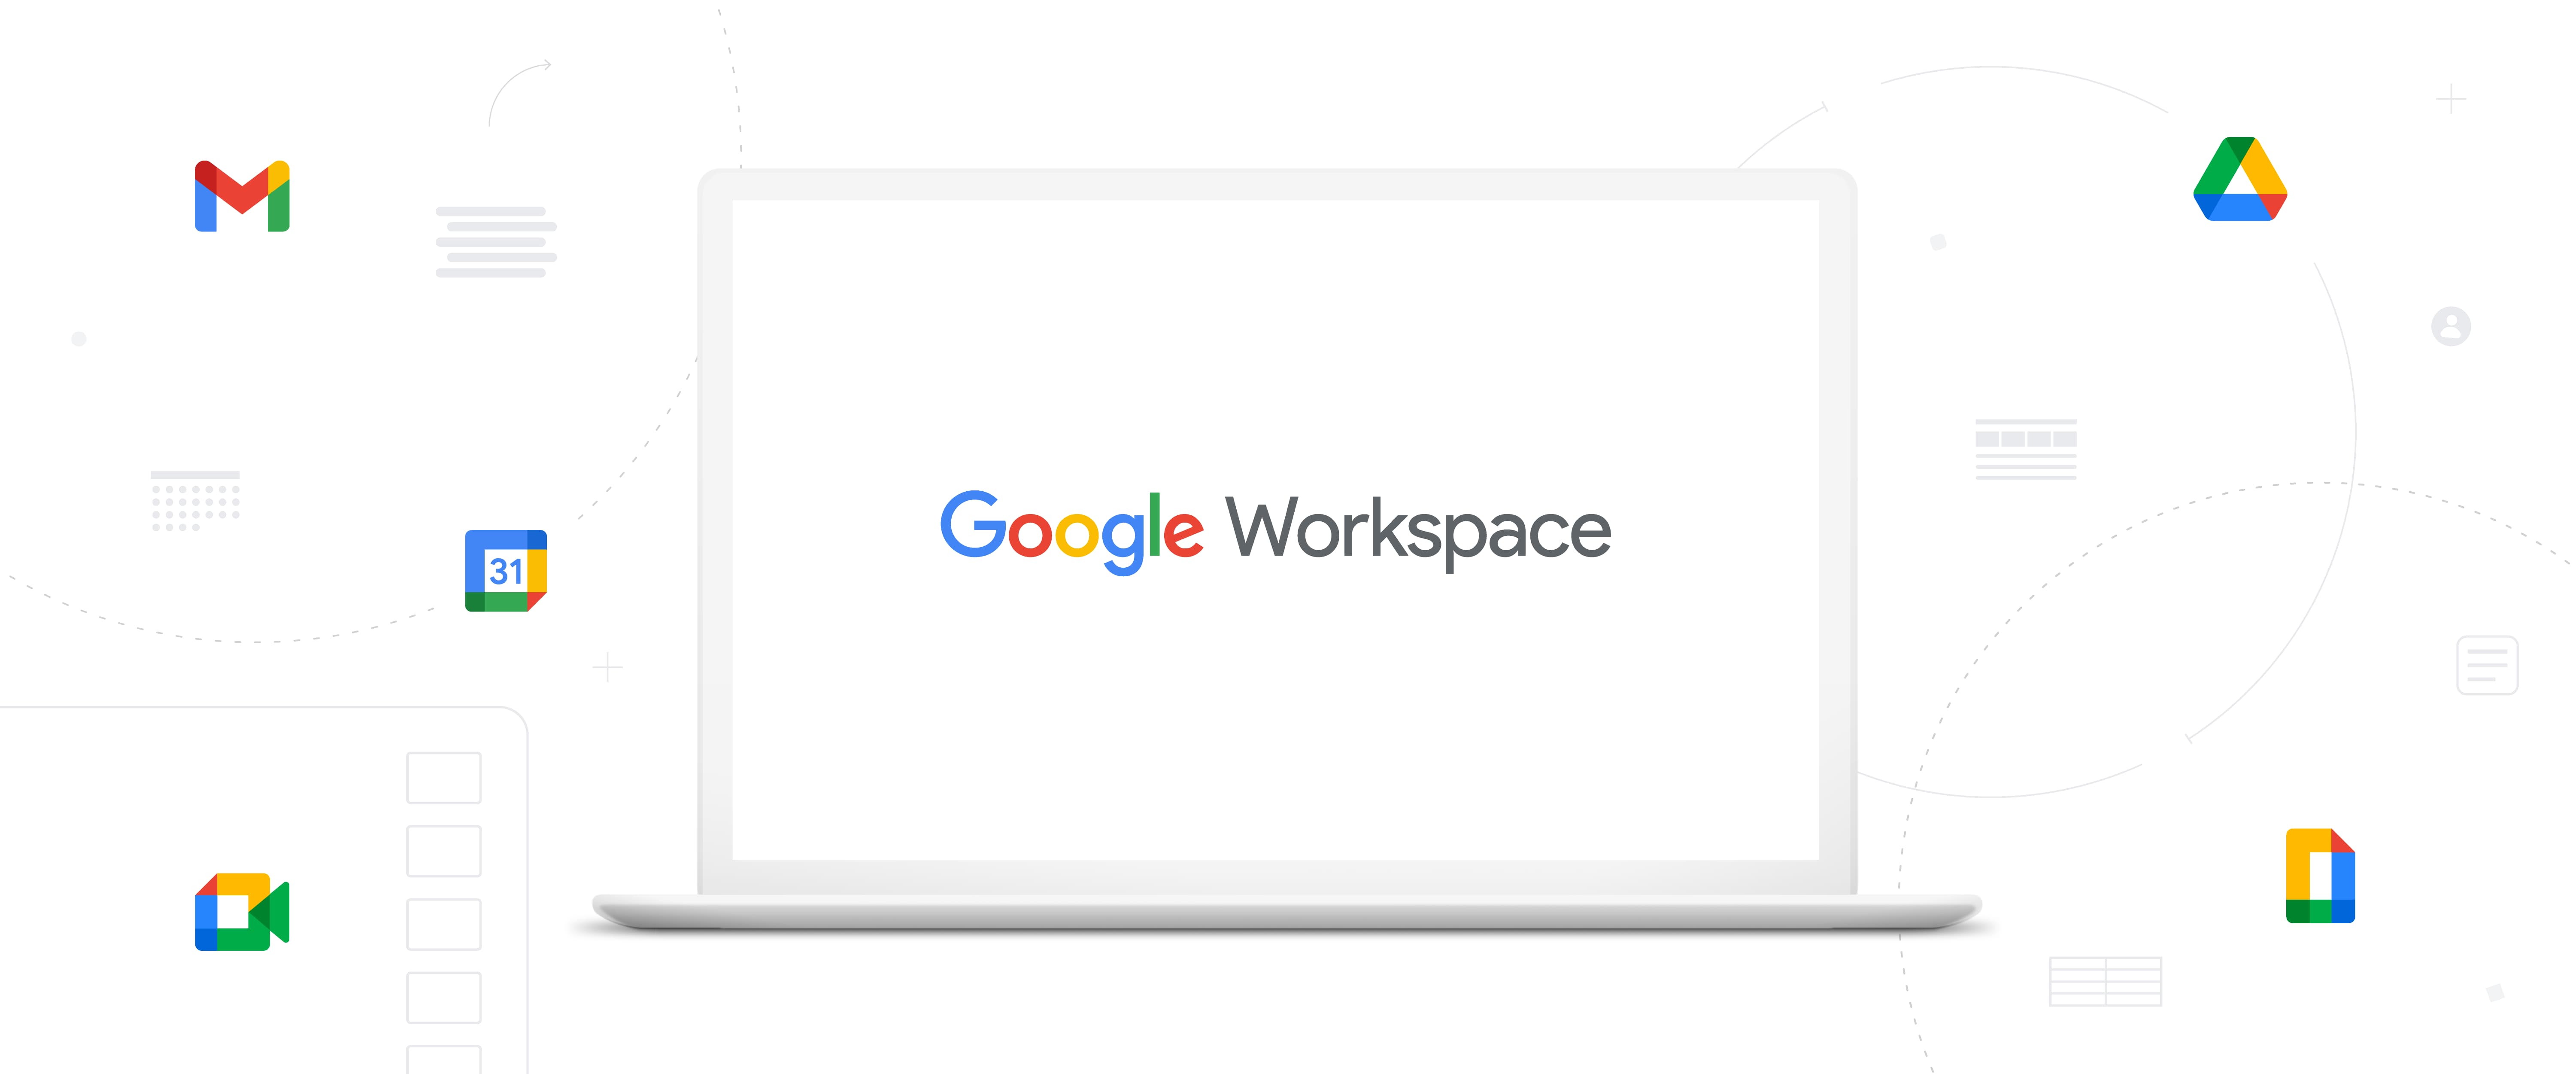 Announcing Google Workspace Everything You Need To Get It Done In One Location Google Cloud Blog